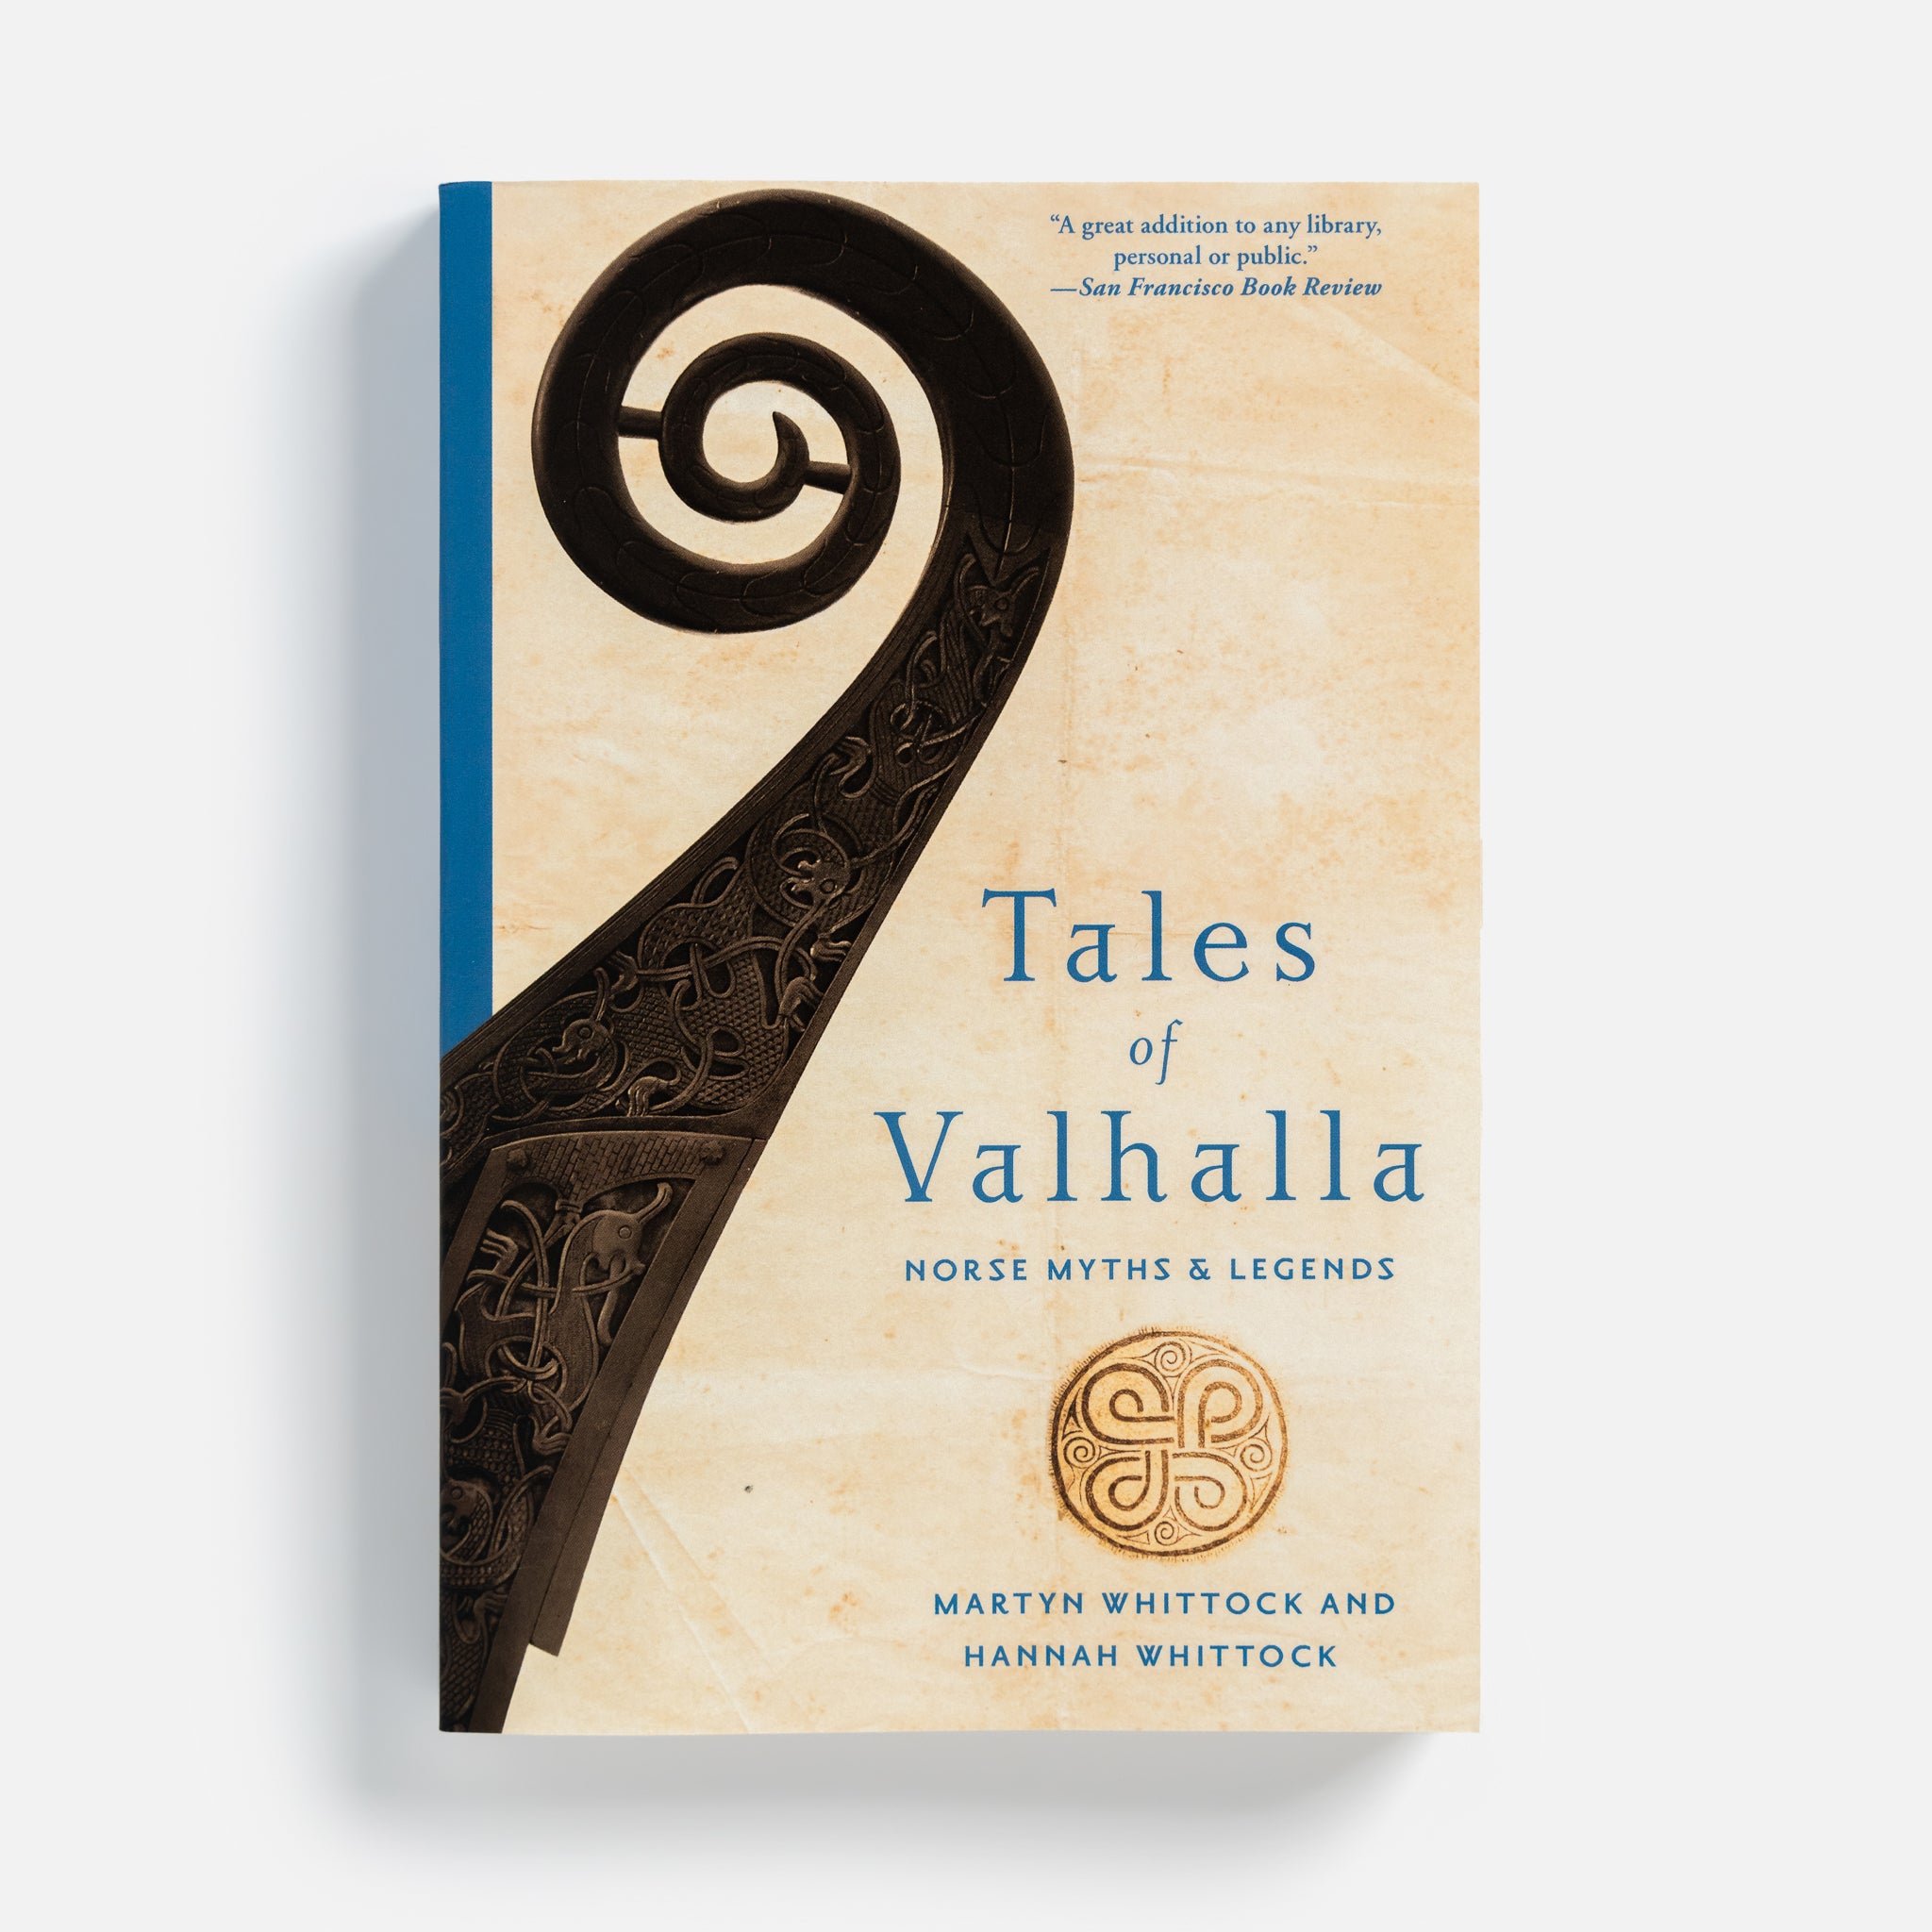 Tales of Valhalla Norse Myths and Legends by Martyn and Hannah Whittock